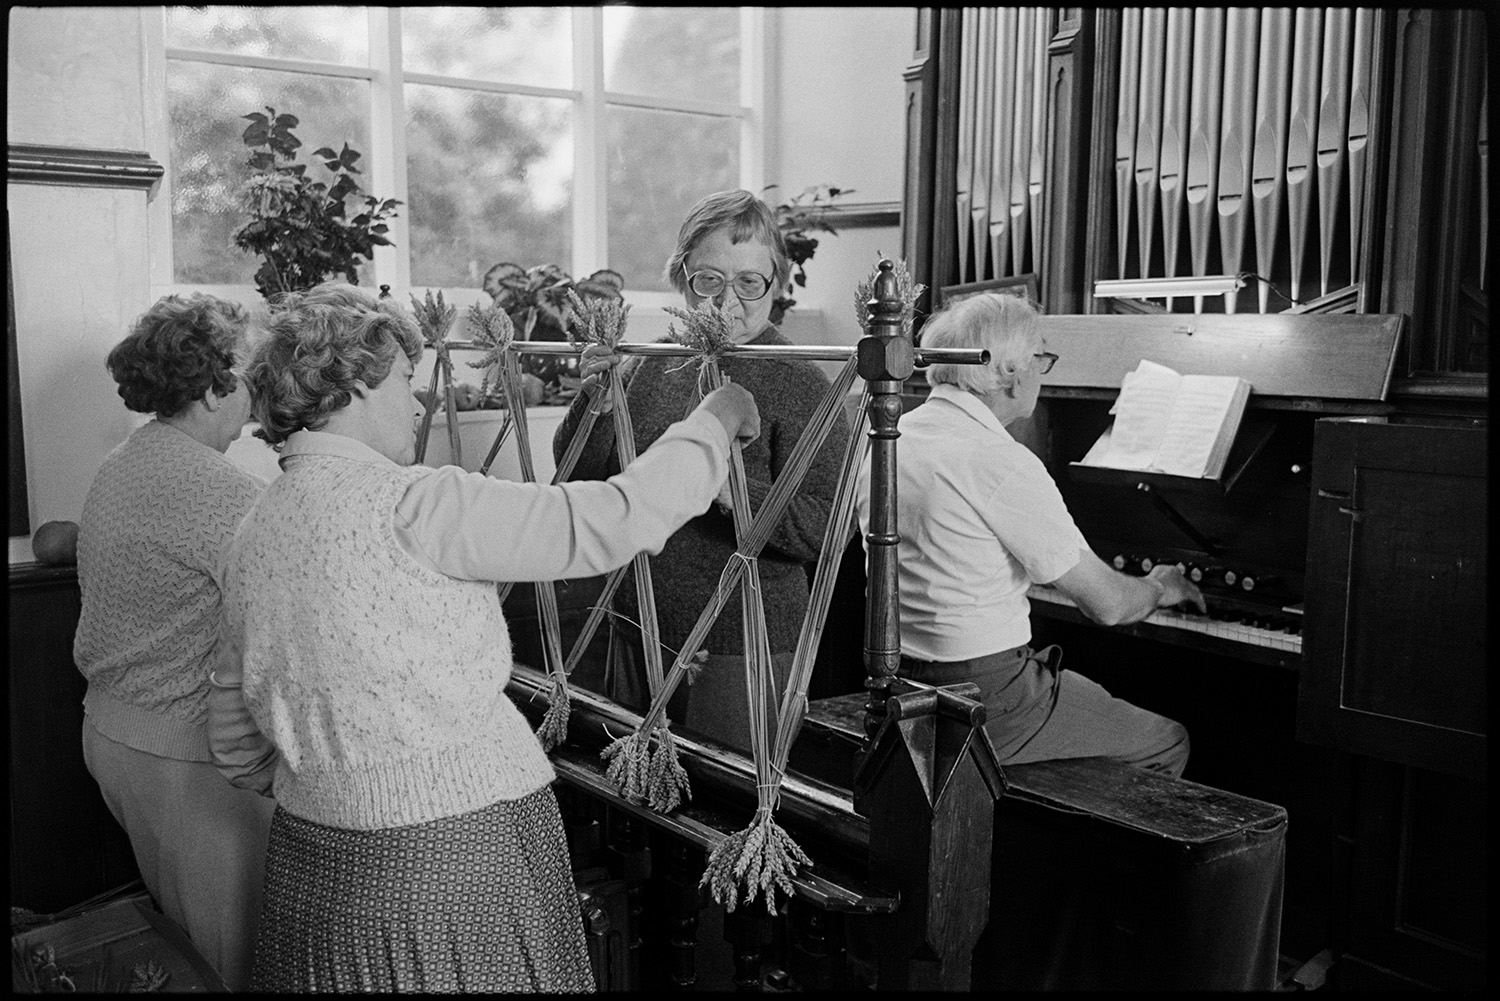 Congregational chapel interior, man playing organ to people decorating at Harvest Festival.
[A man playing the organ at Chulmleigh Congregational chapel while three woman decorate the chapel behind him for the Harvest Festival using tied reeds of wheat. The metal organ pipes are shown above the organ.]